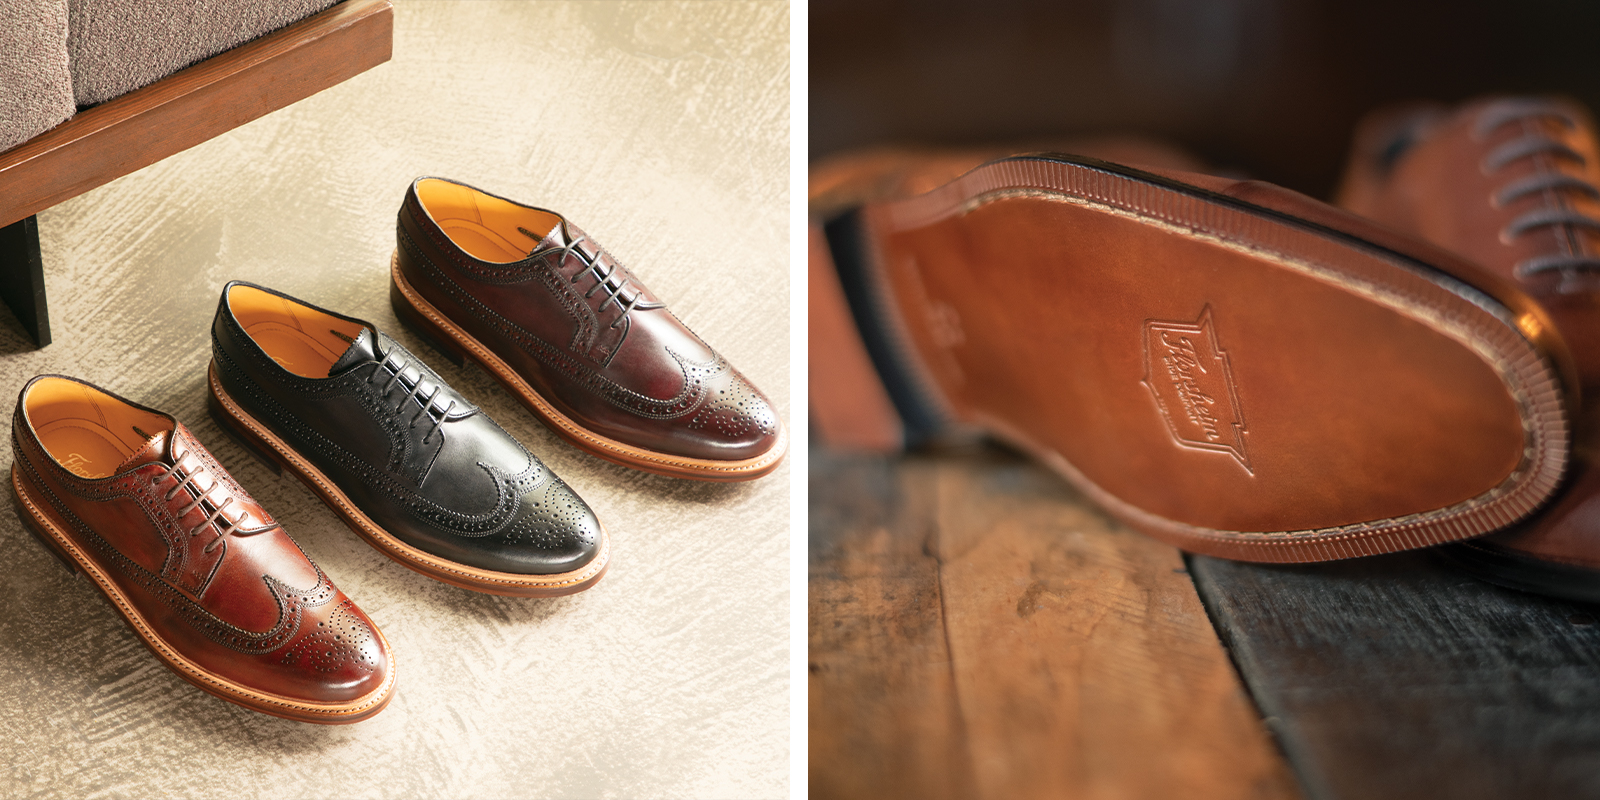 The featured image shows three Kenmoor II Wingtip Oxford shoes in different colors. The featured product is the Kenmoor II Wingtip Oxford in Cognac, Black, and Burgundy.